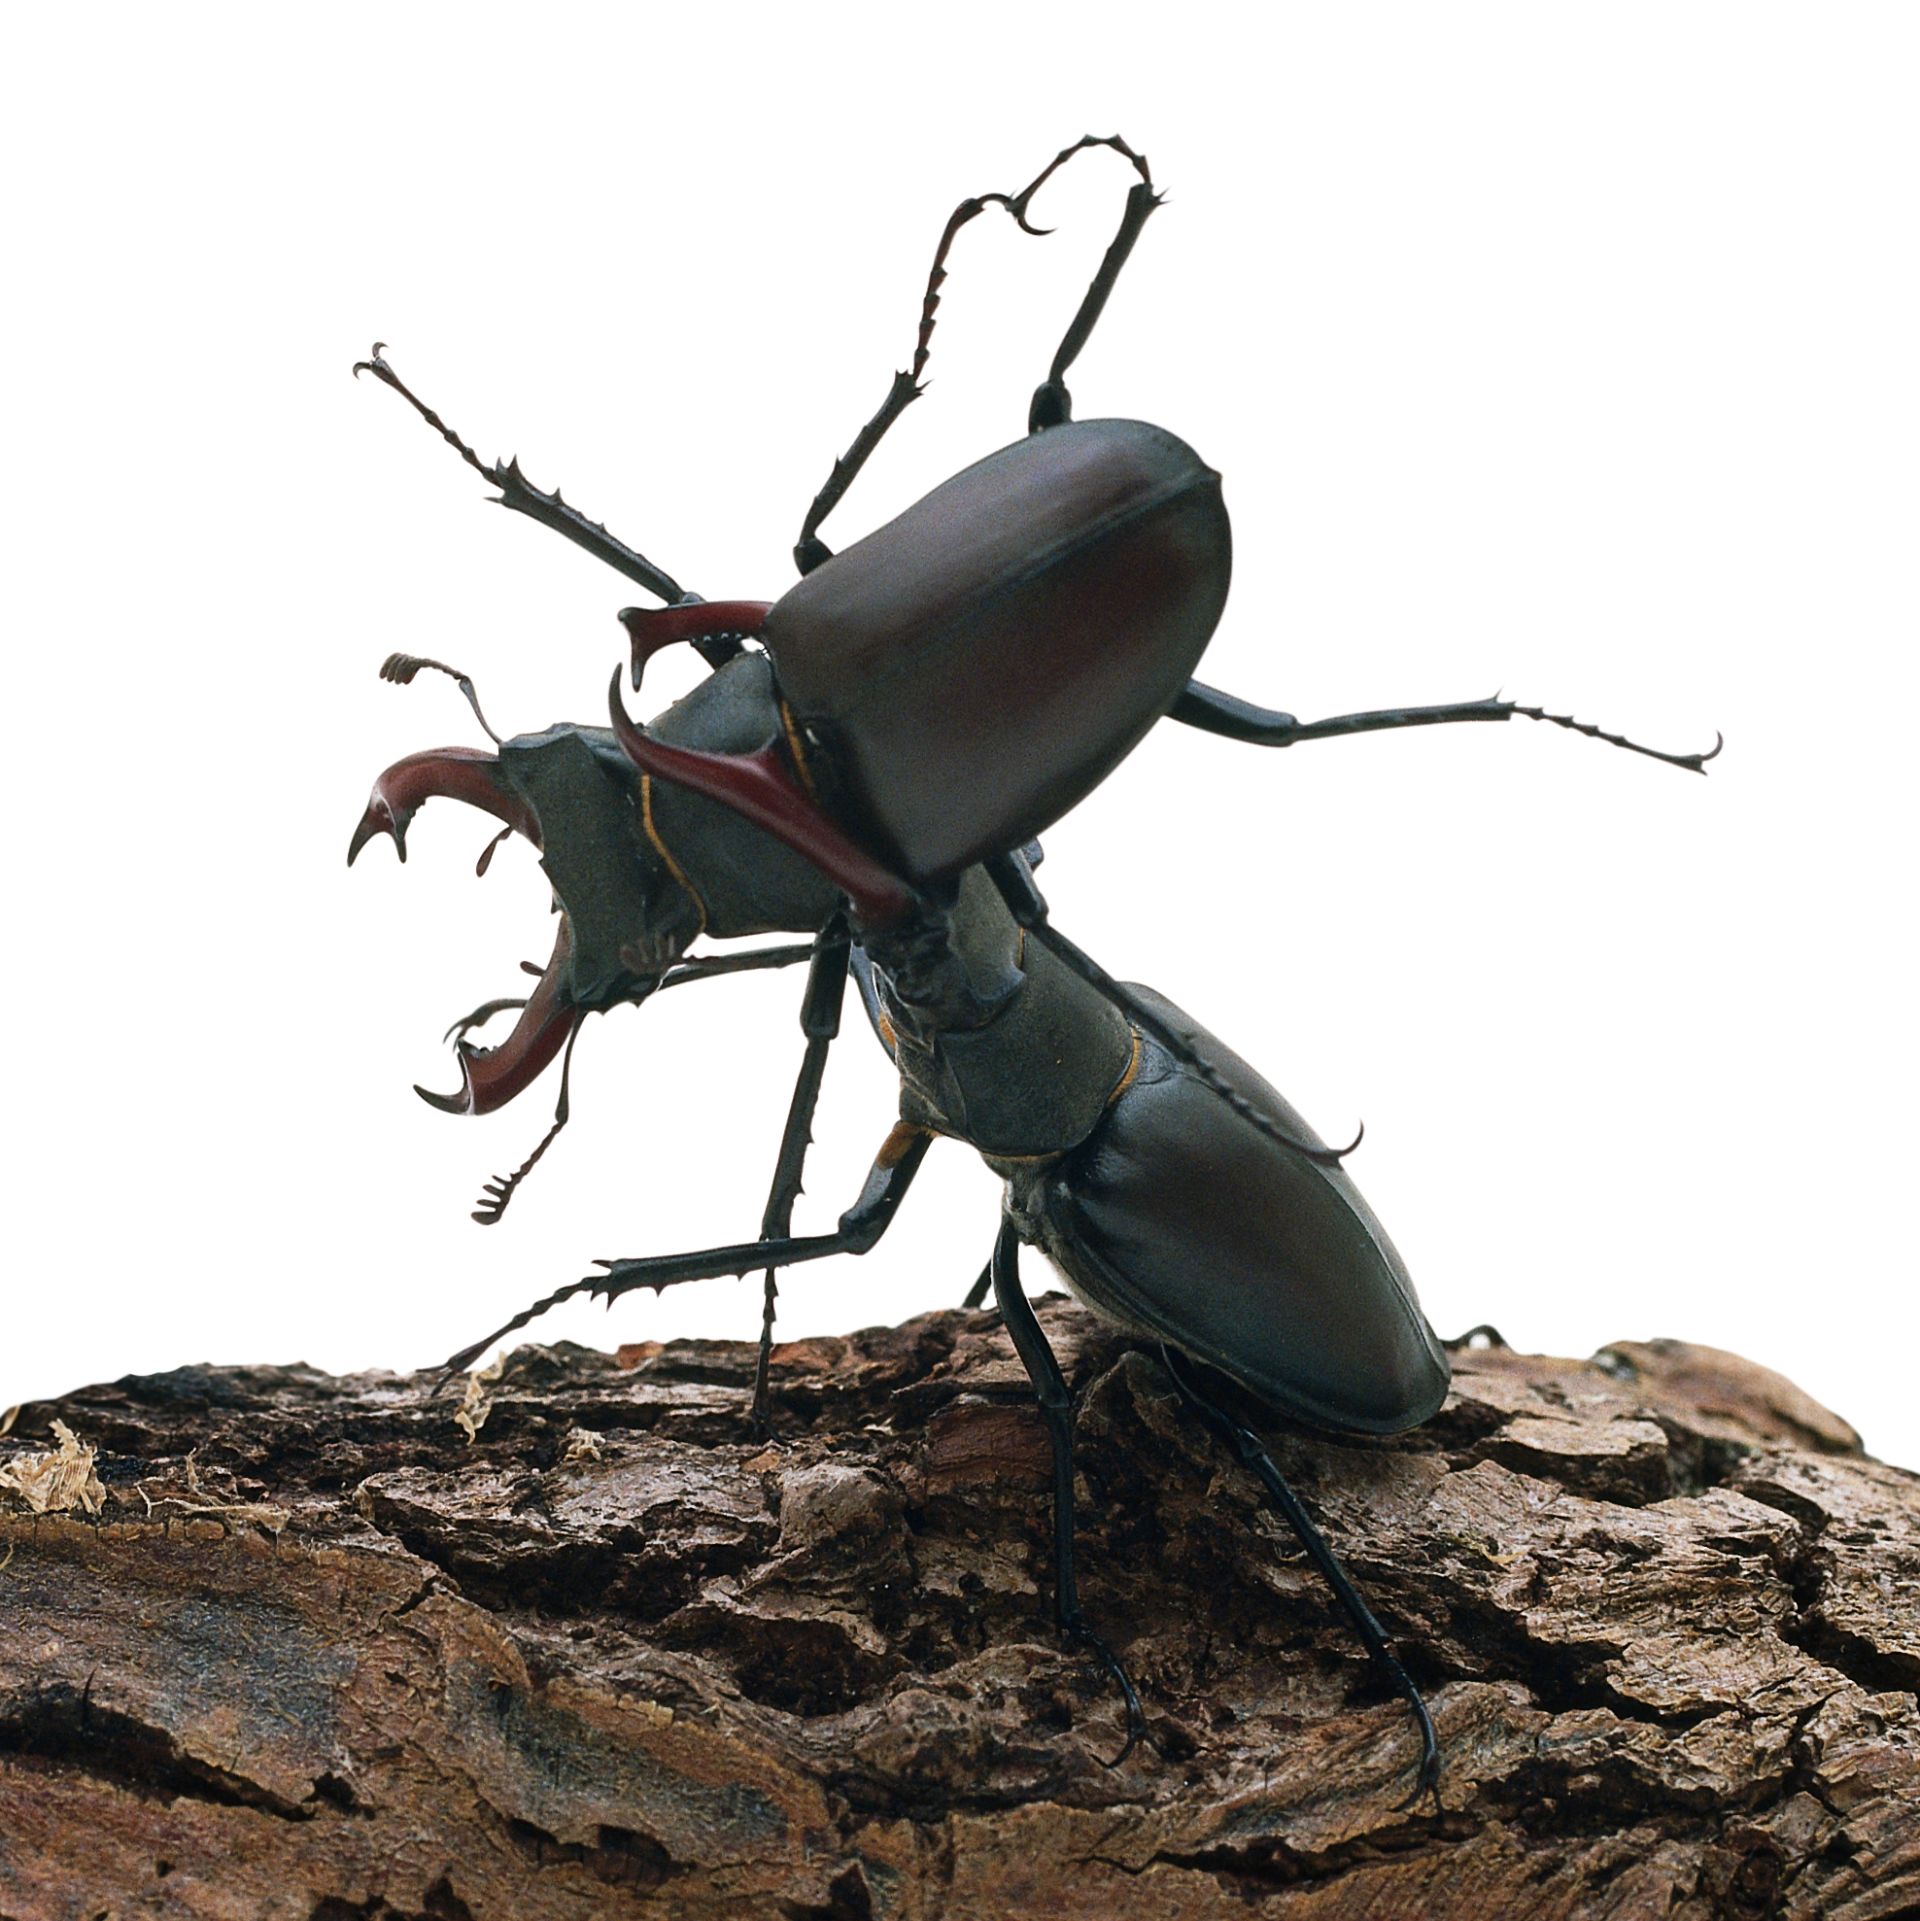 Stag Beetle Facts | What Are Stag Beetles? | DK Find Out